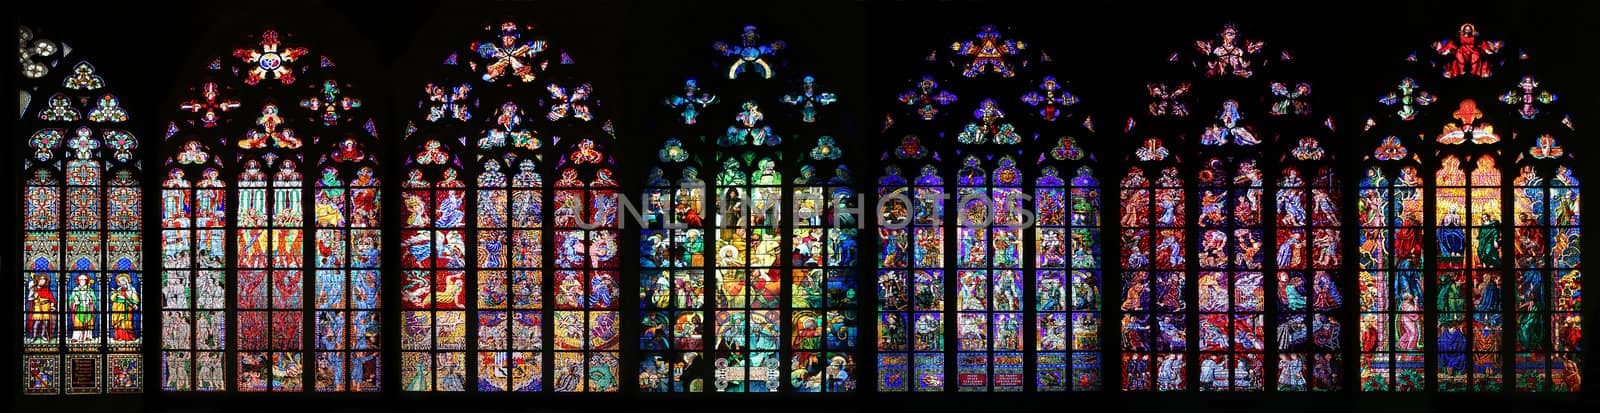 St. Vitus Cathedral stained glass window collection, Prague, Czech Republic